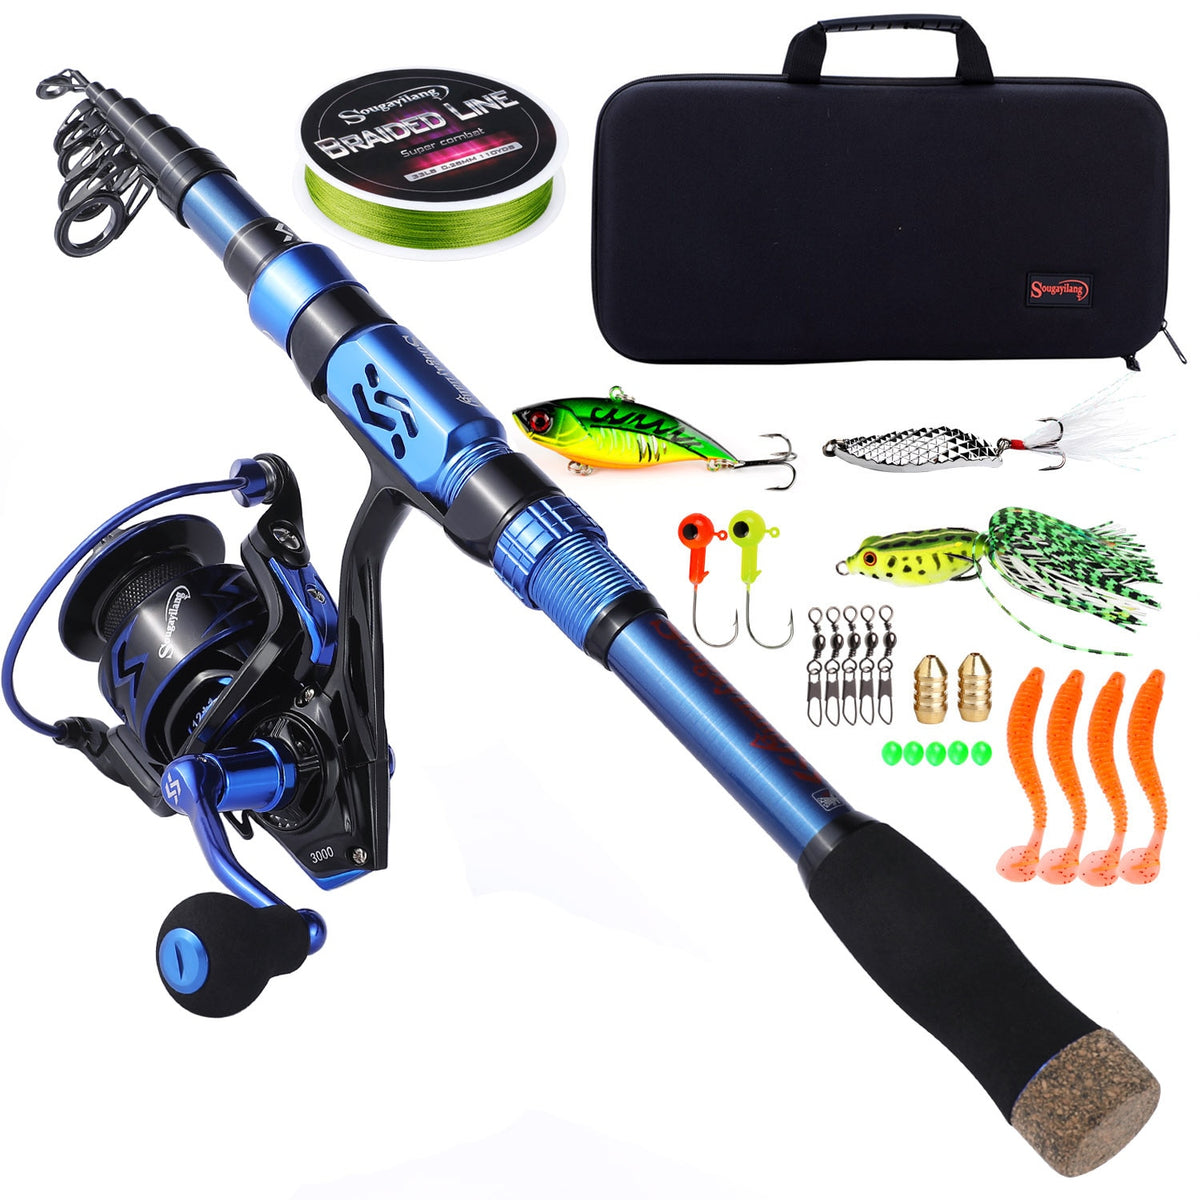 Dropship Sougayilang Travel Telescopic Fishing Rod Glass Fiber Fishing Pole  to Sell Online at a Lower Price